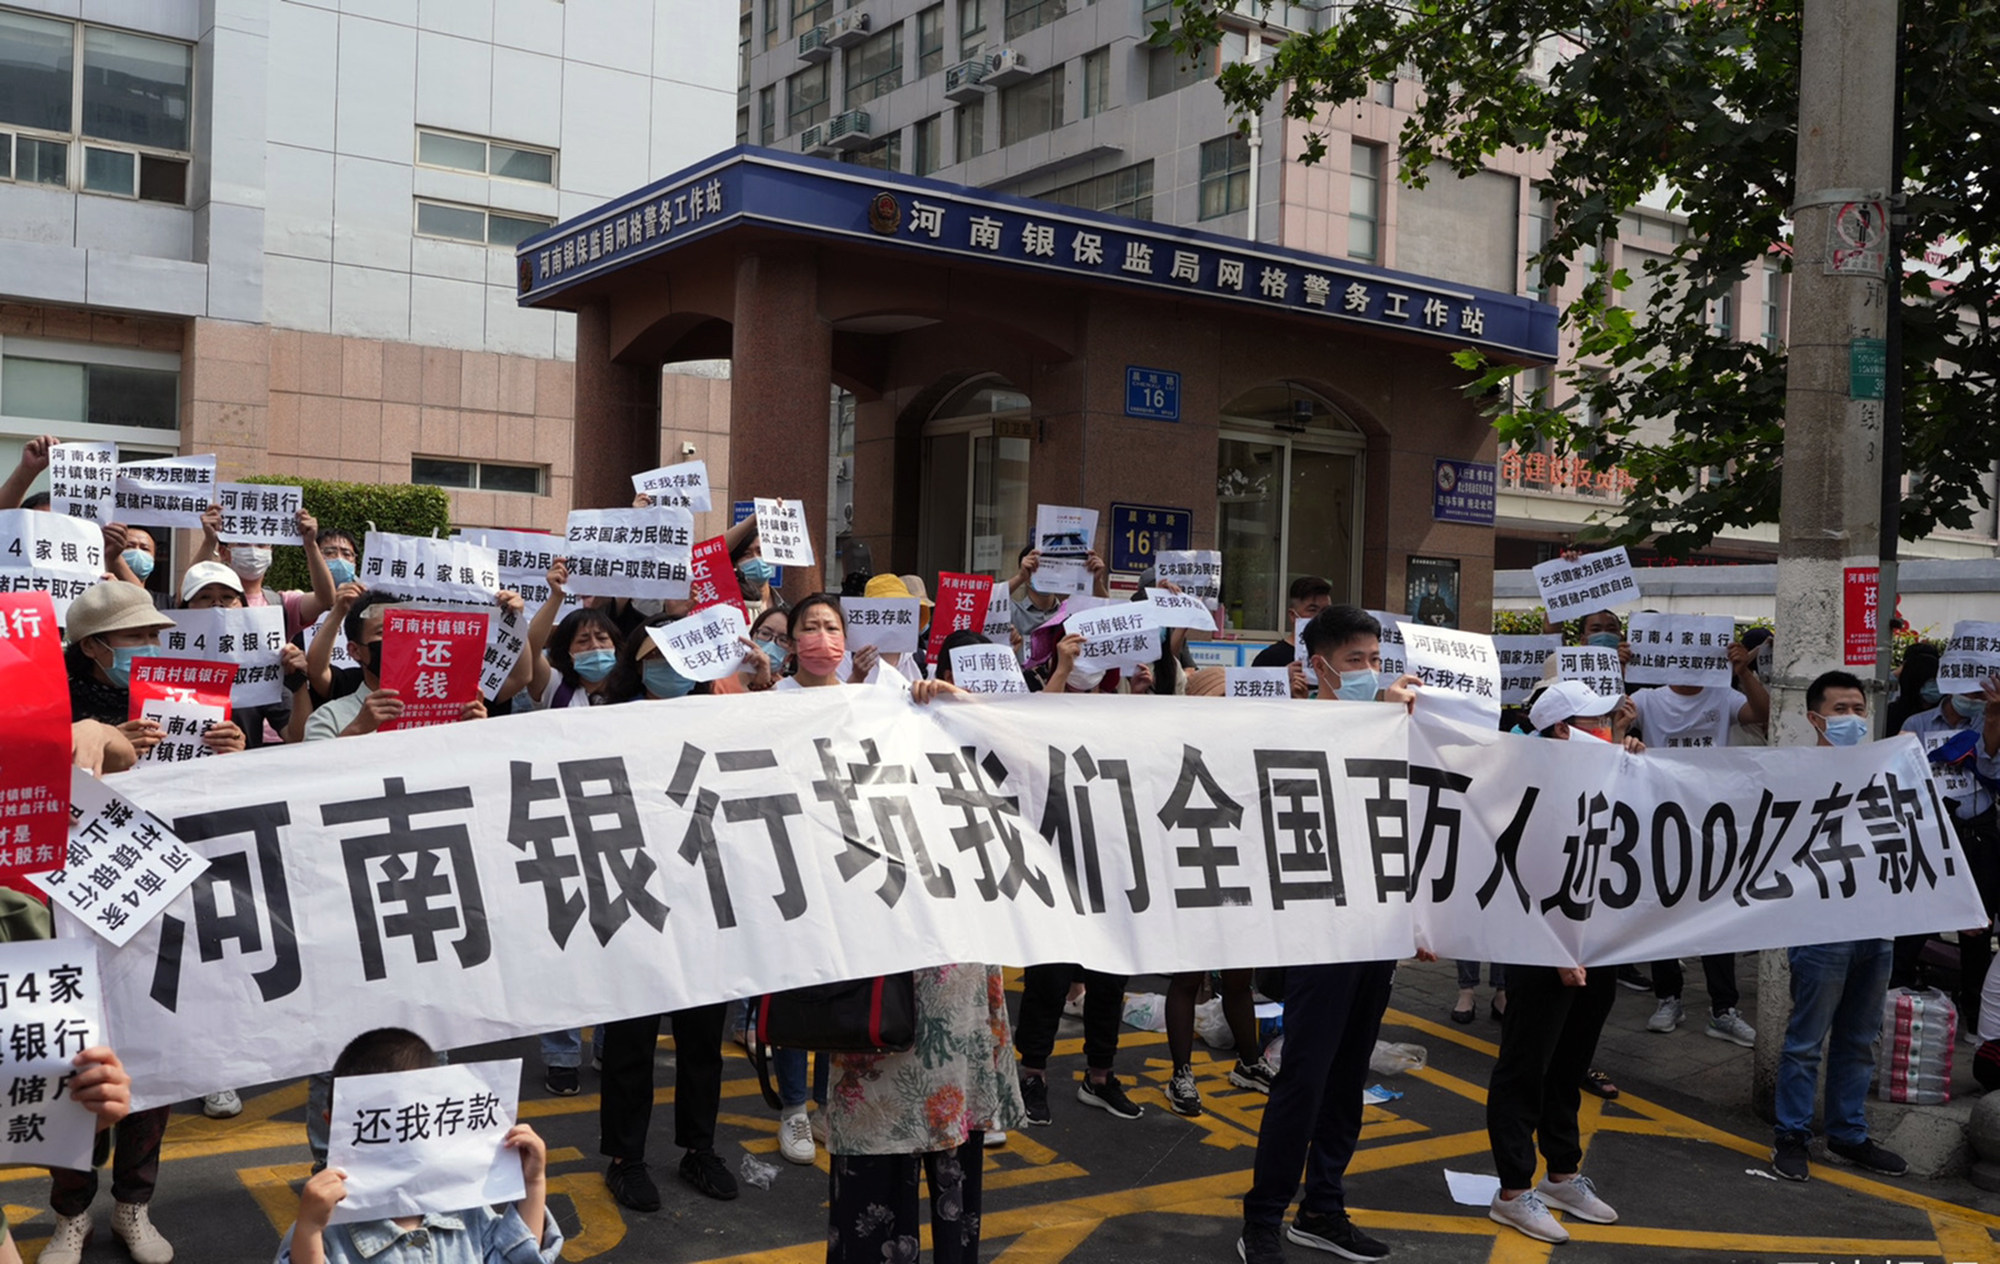 Residents protest in front of the Henan branch of the former China Banking and Insurance Regulatory Commission In Zhengzhou in May last year over a rural bank scandal. Photo: Weibo